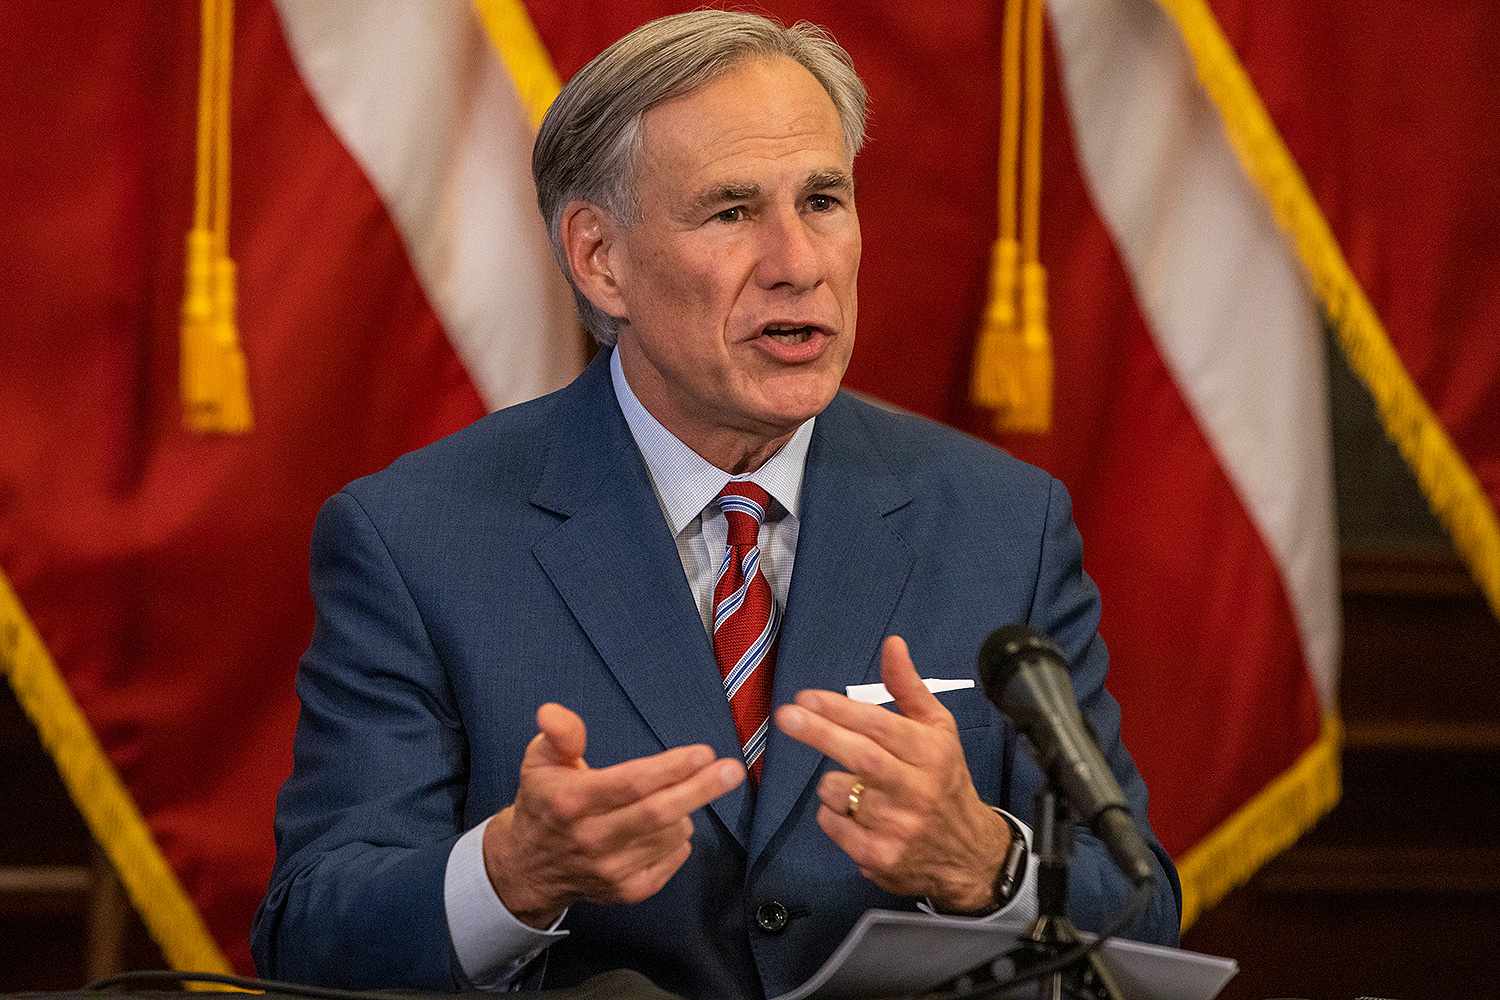 Texas Governor Issues Executive Order Banning Vaccine Mandates